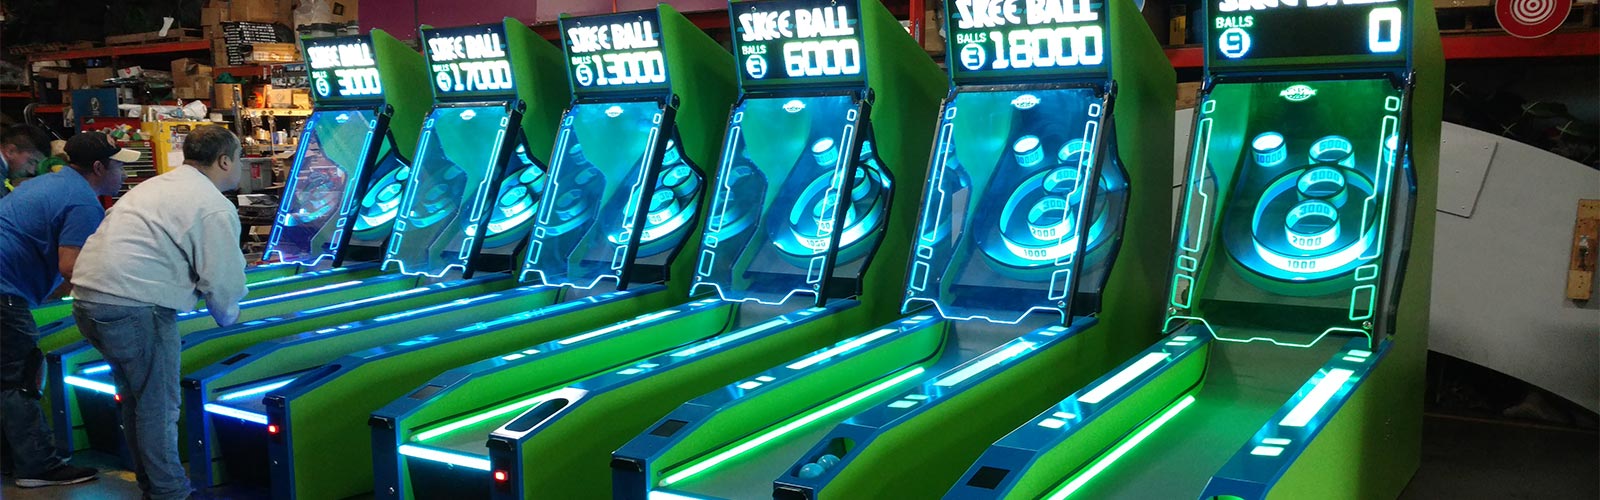 Skee Ball Game for Rent